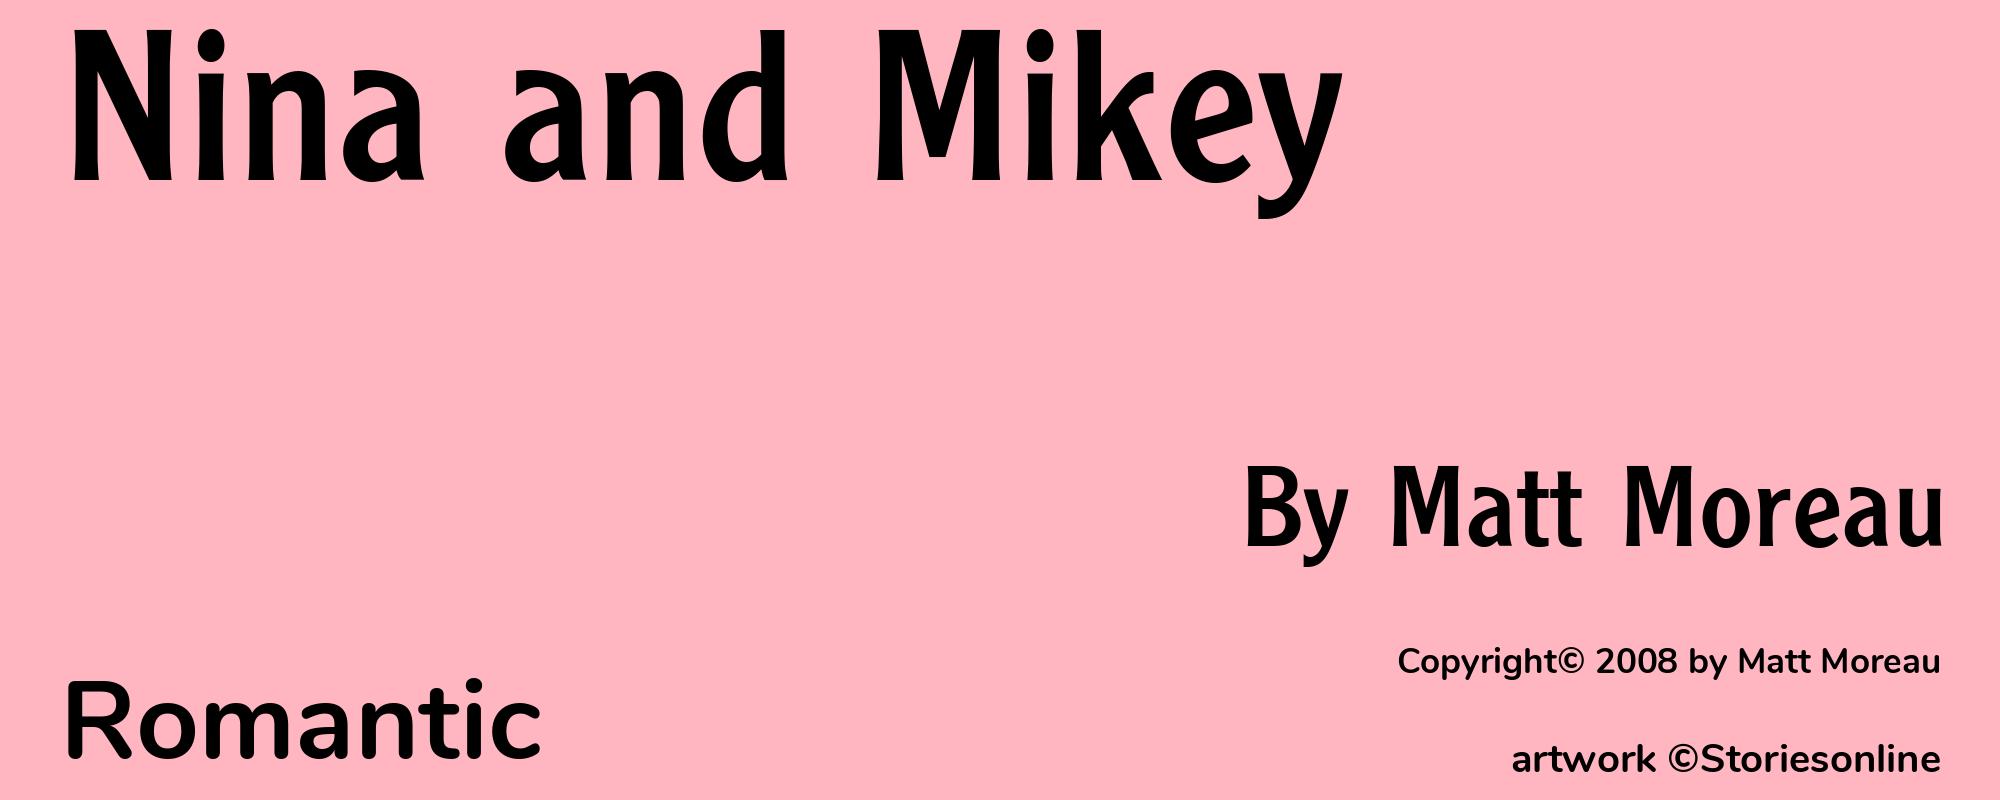 Nina and Mikey - Cover